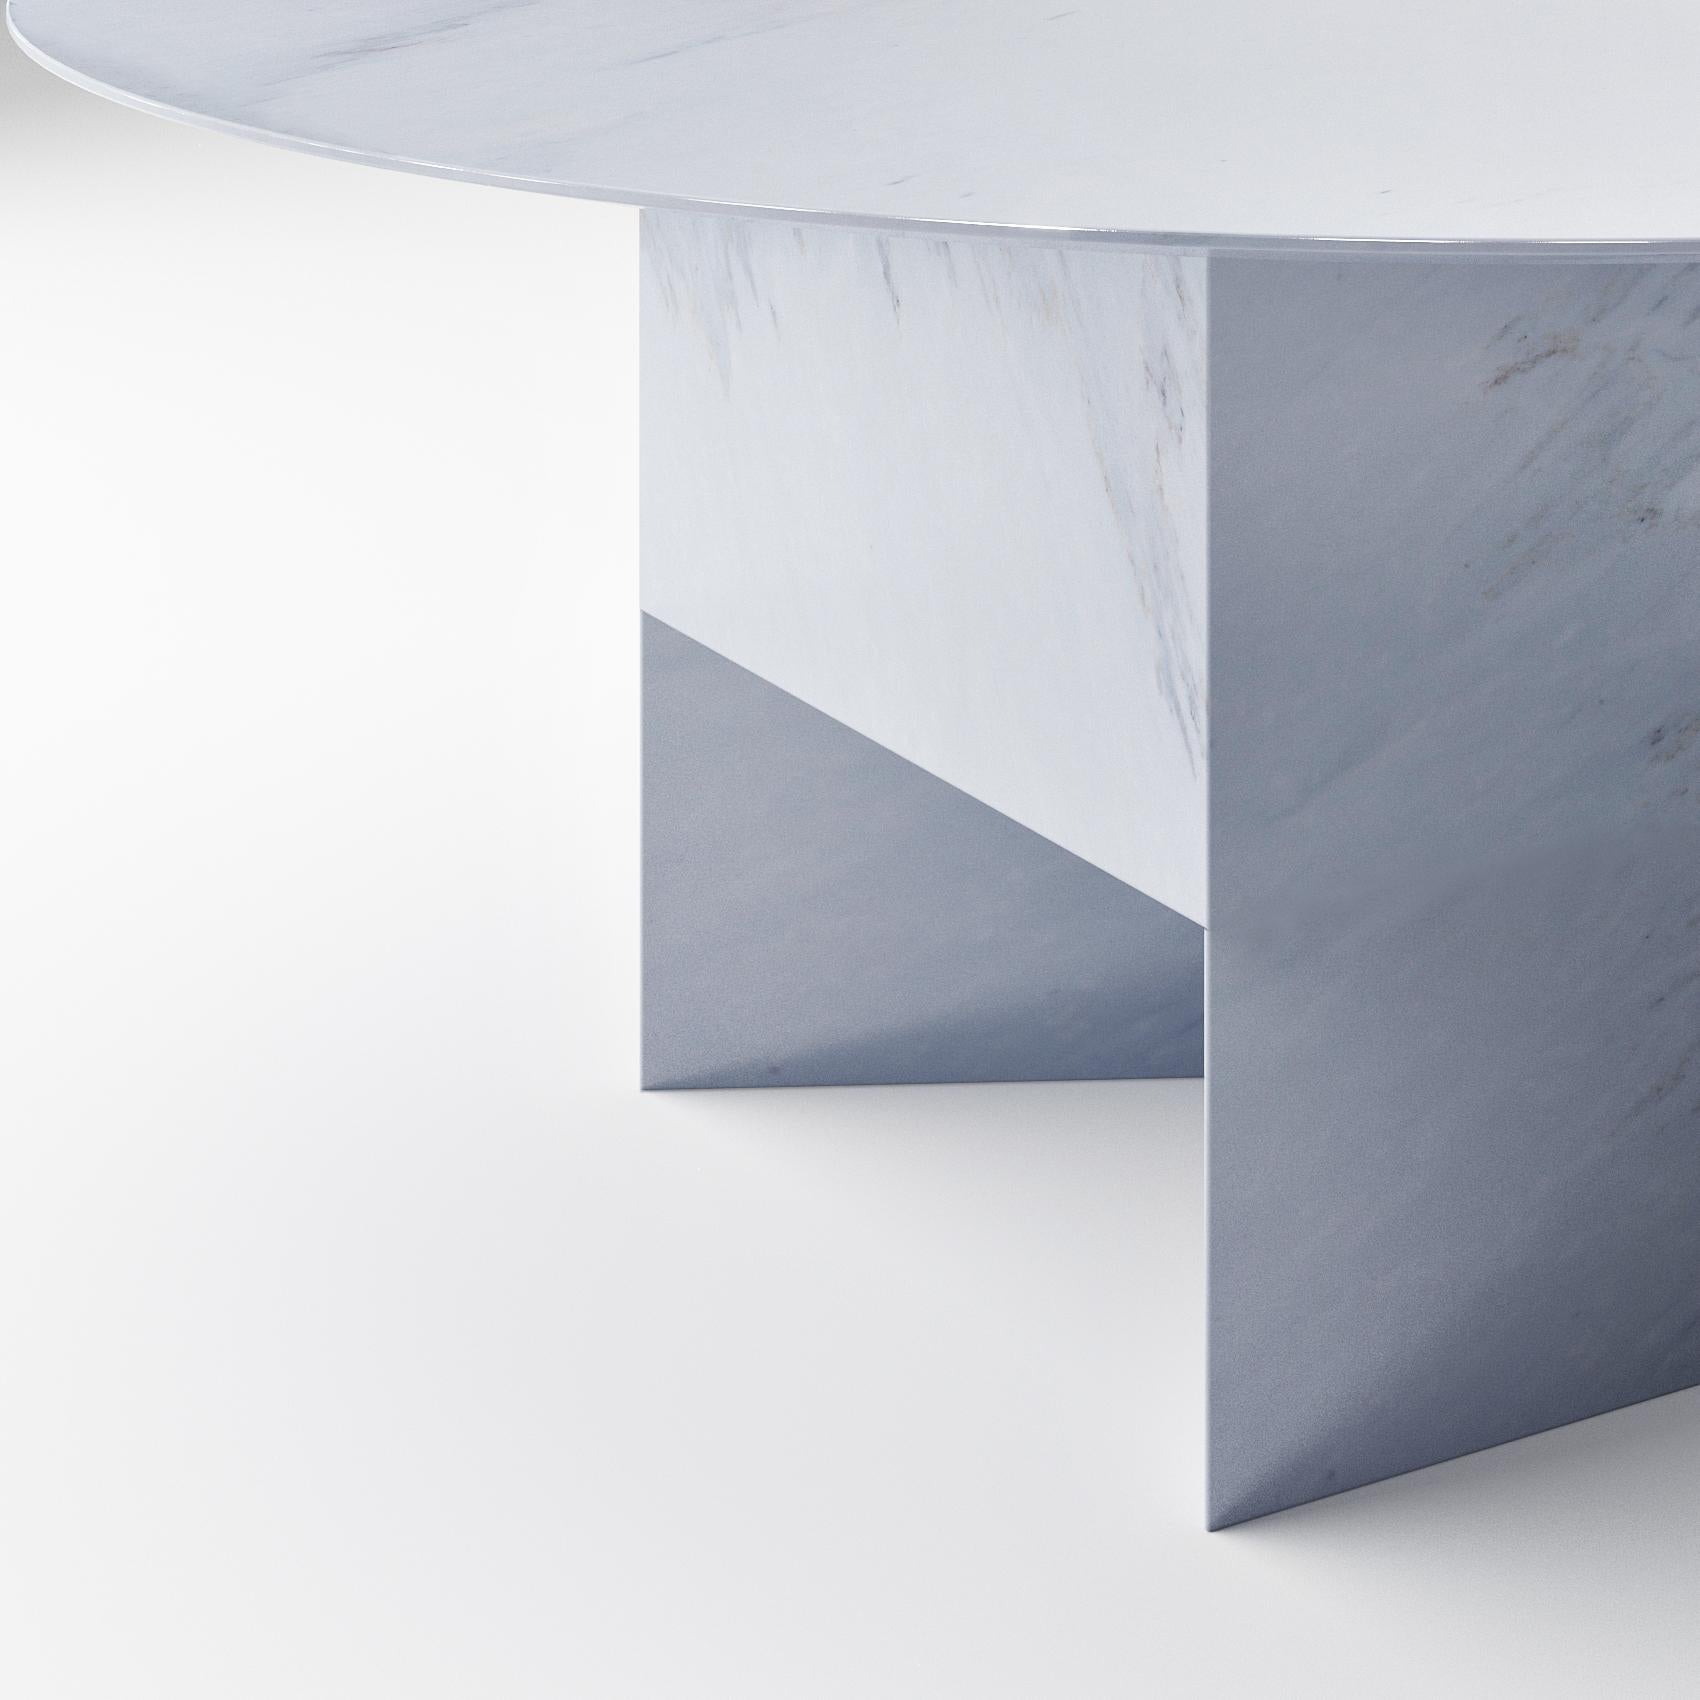 Mild difference marble table by Scattered Disc Objects

Material: Carrara marble or bardiglio marble
Specs: Table top thickness = 3cm, with safety nylon net
Dimensions: Diameter 160 cm, height 73cm
Handmade in Italy

Available in Size and